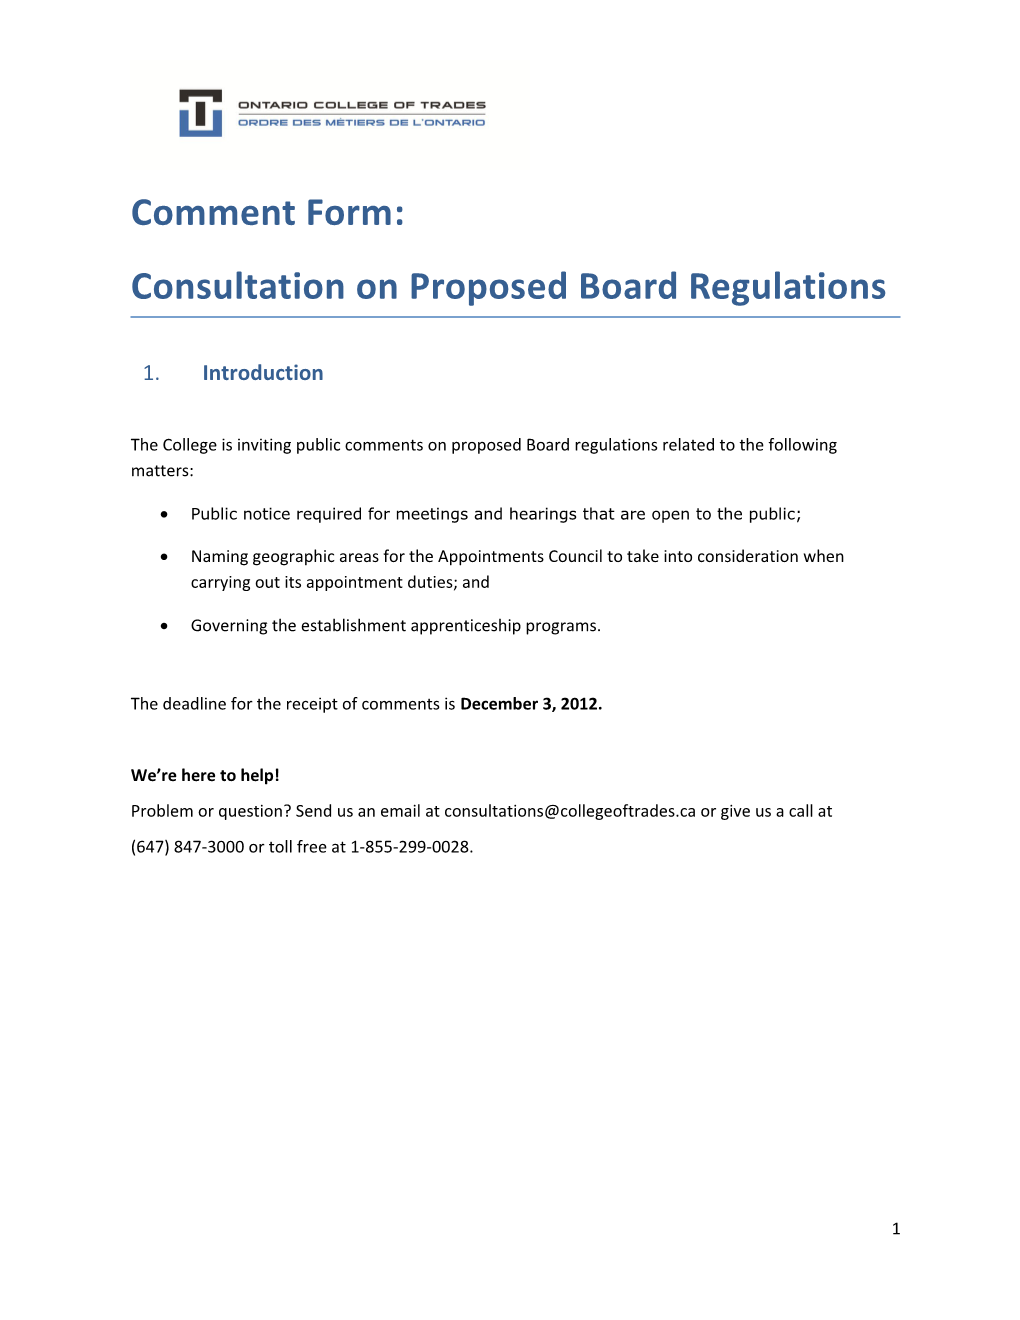 Consultation on Proposed Board Regulations